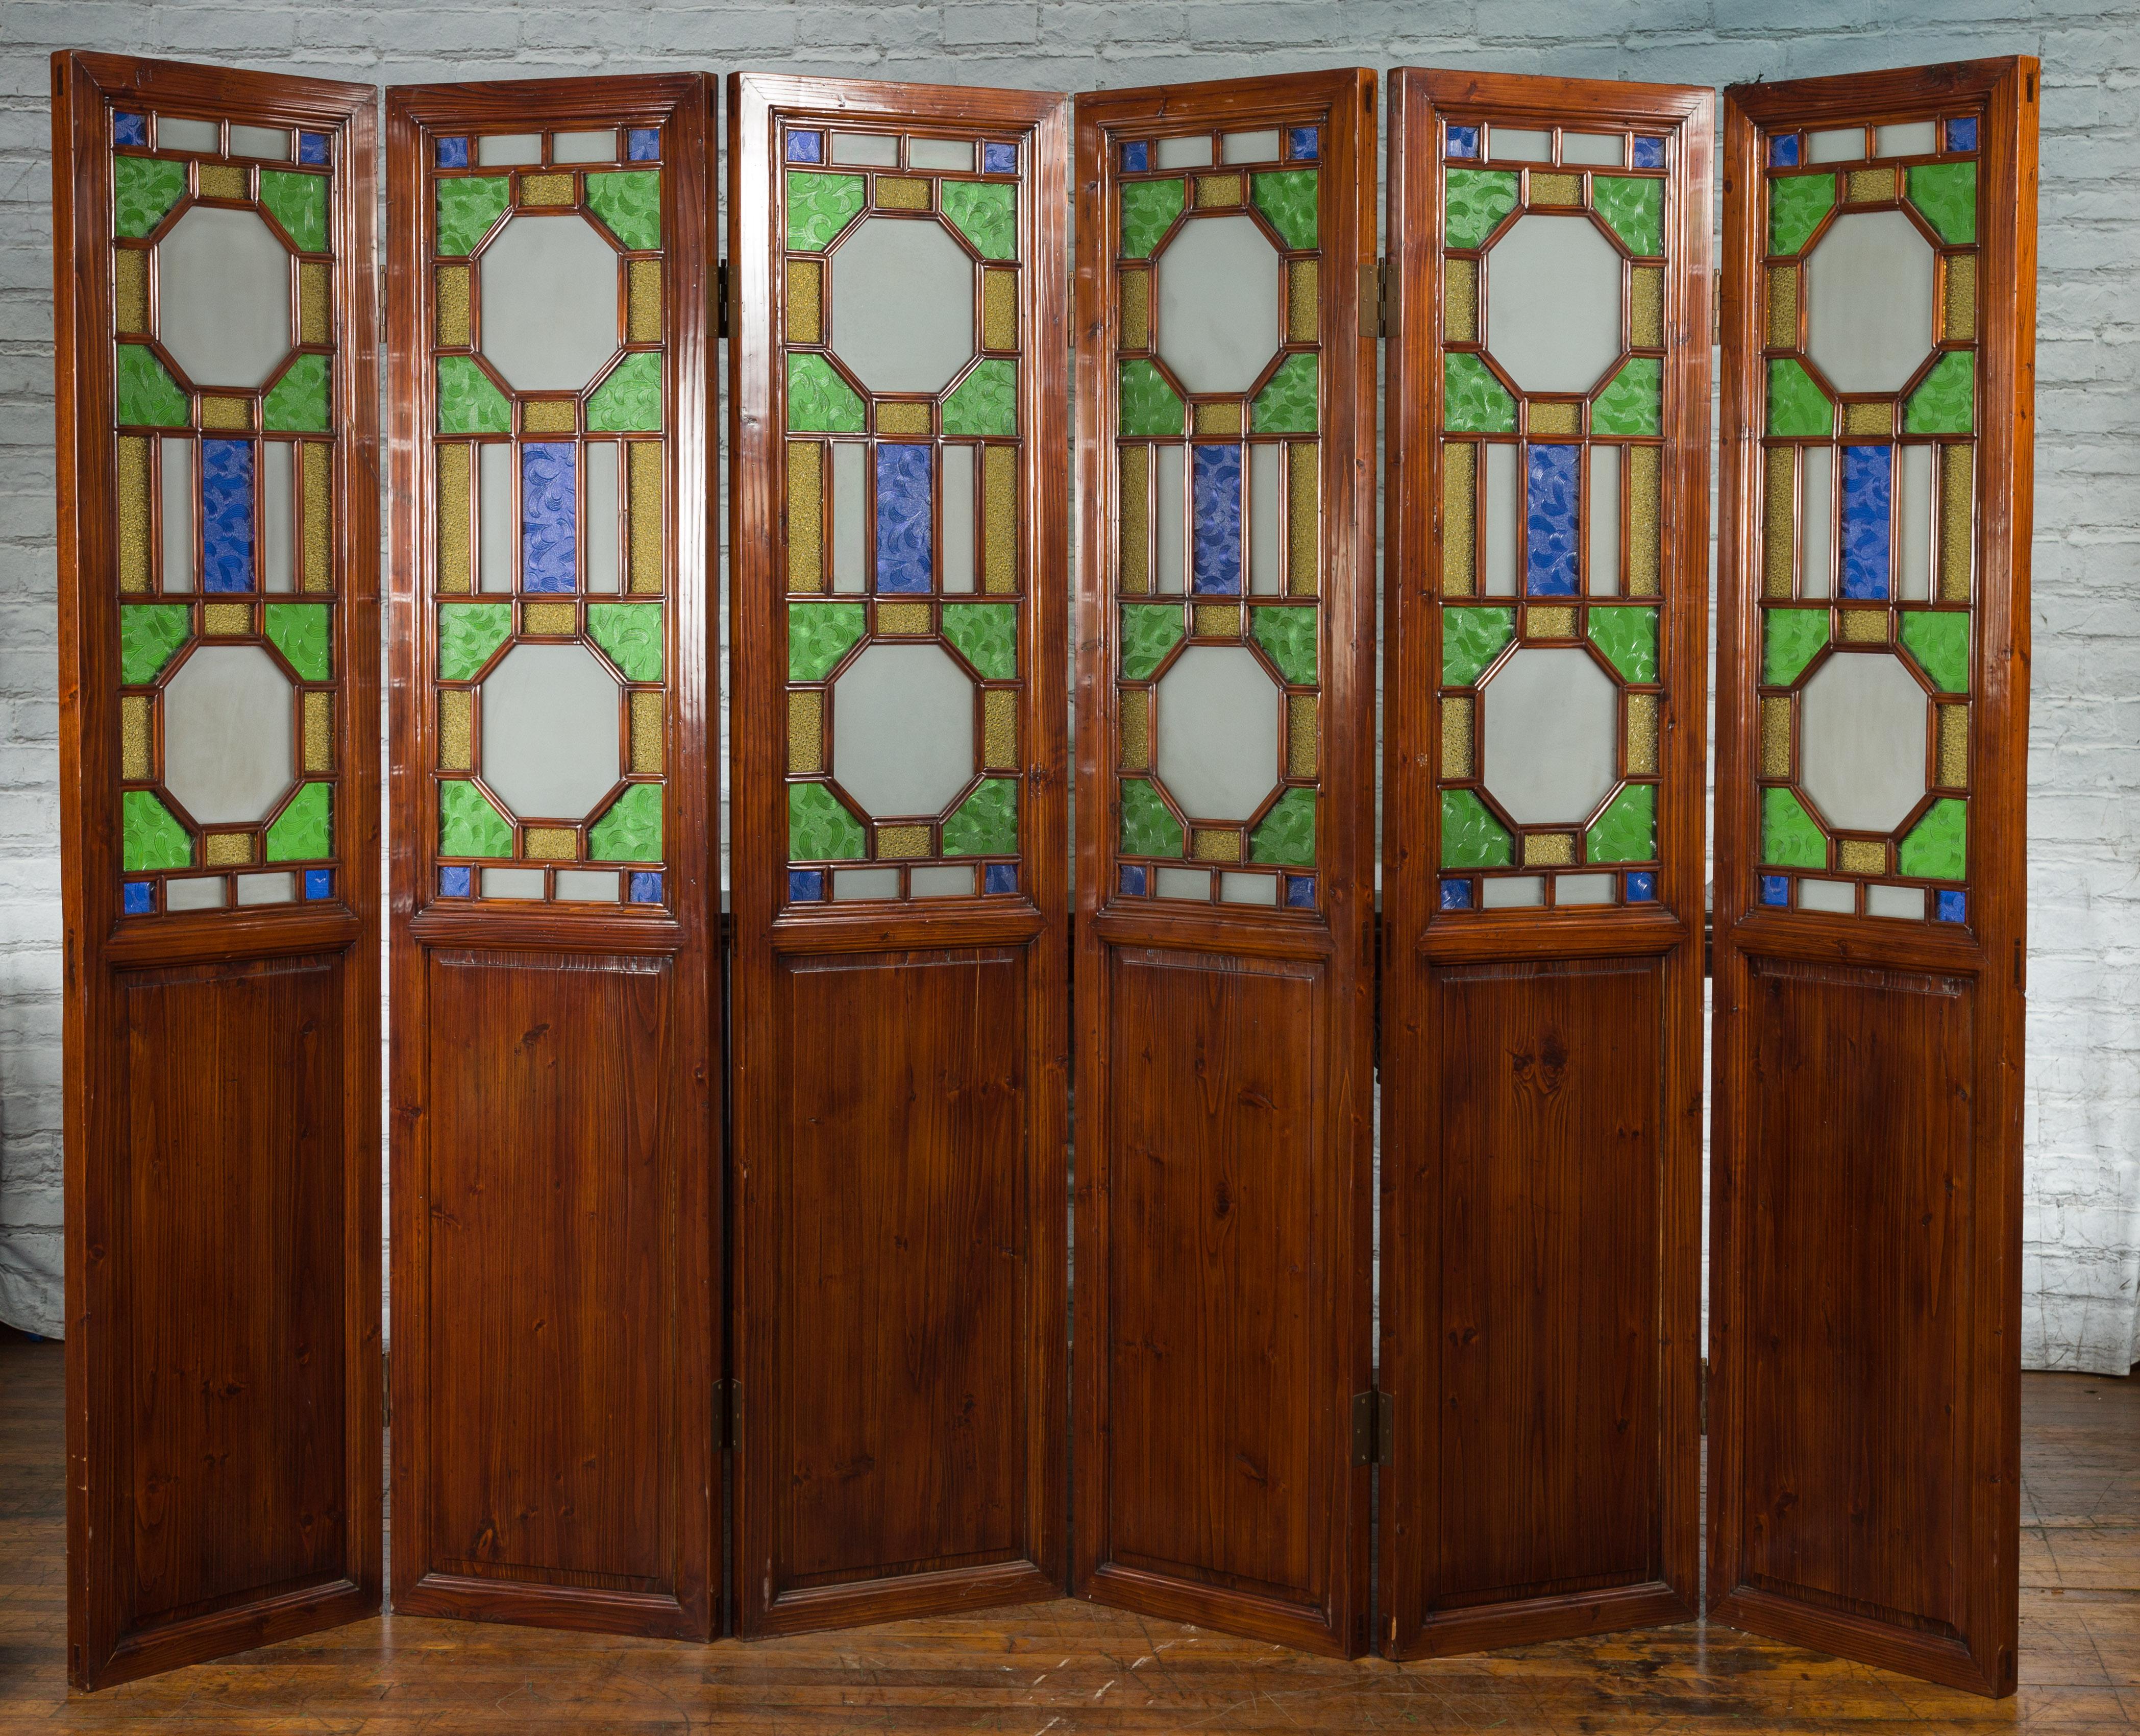 A Chinese antique six-panel folding screen from the early 20th century, with green, blue and yellow stained glass, geometric motifs and wooden panels. Created in China during the first half of the 20th century, this large folding screen features six